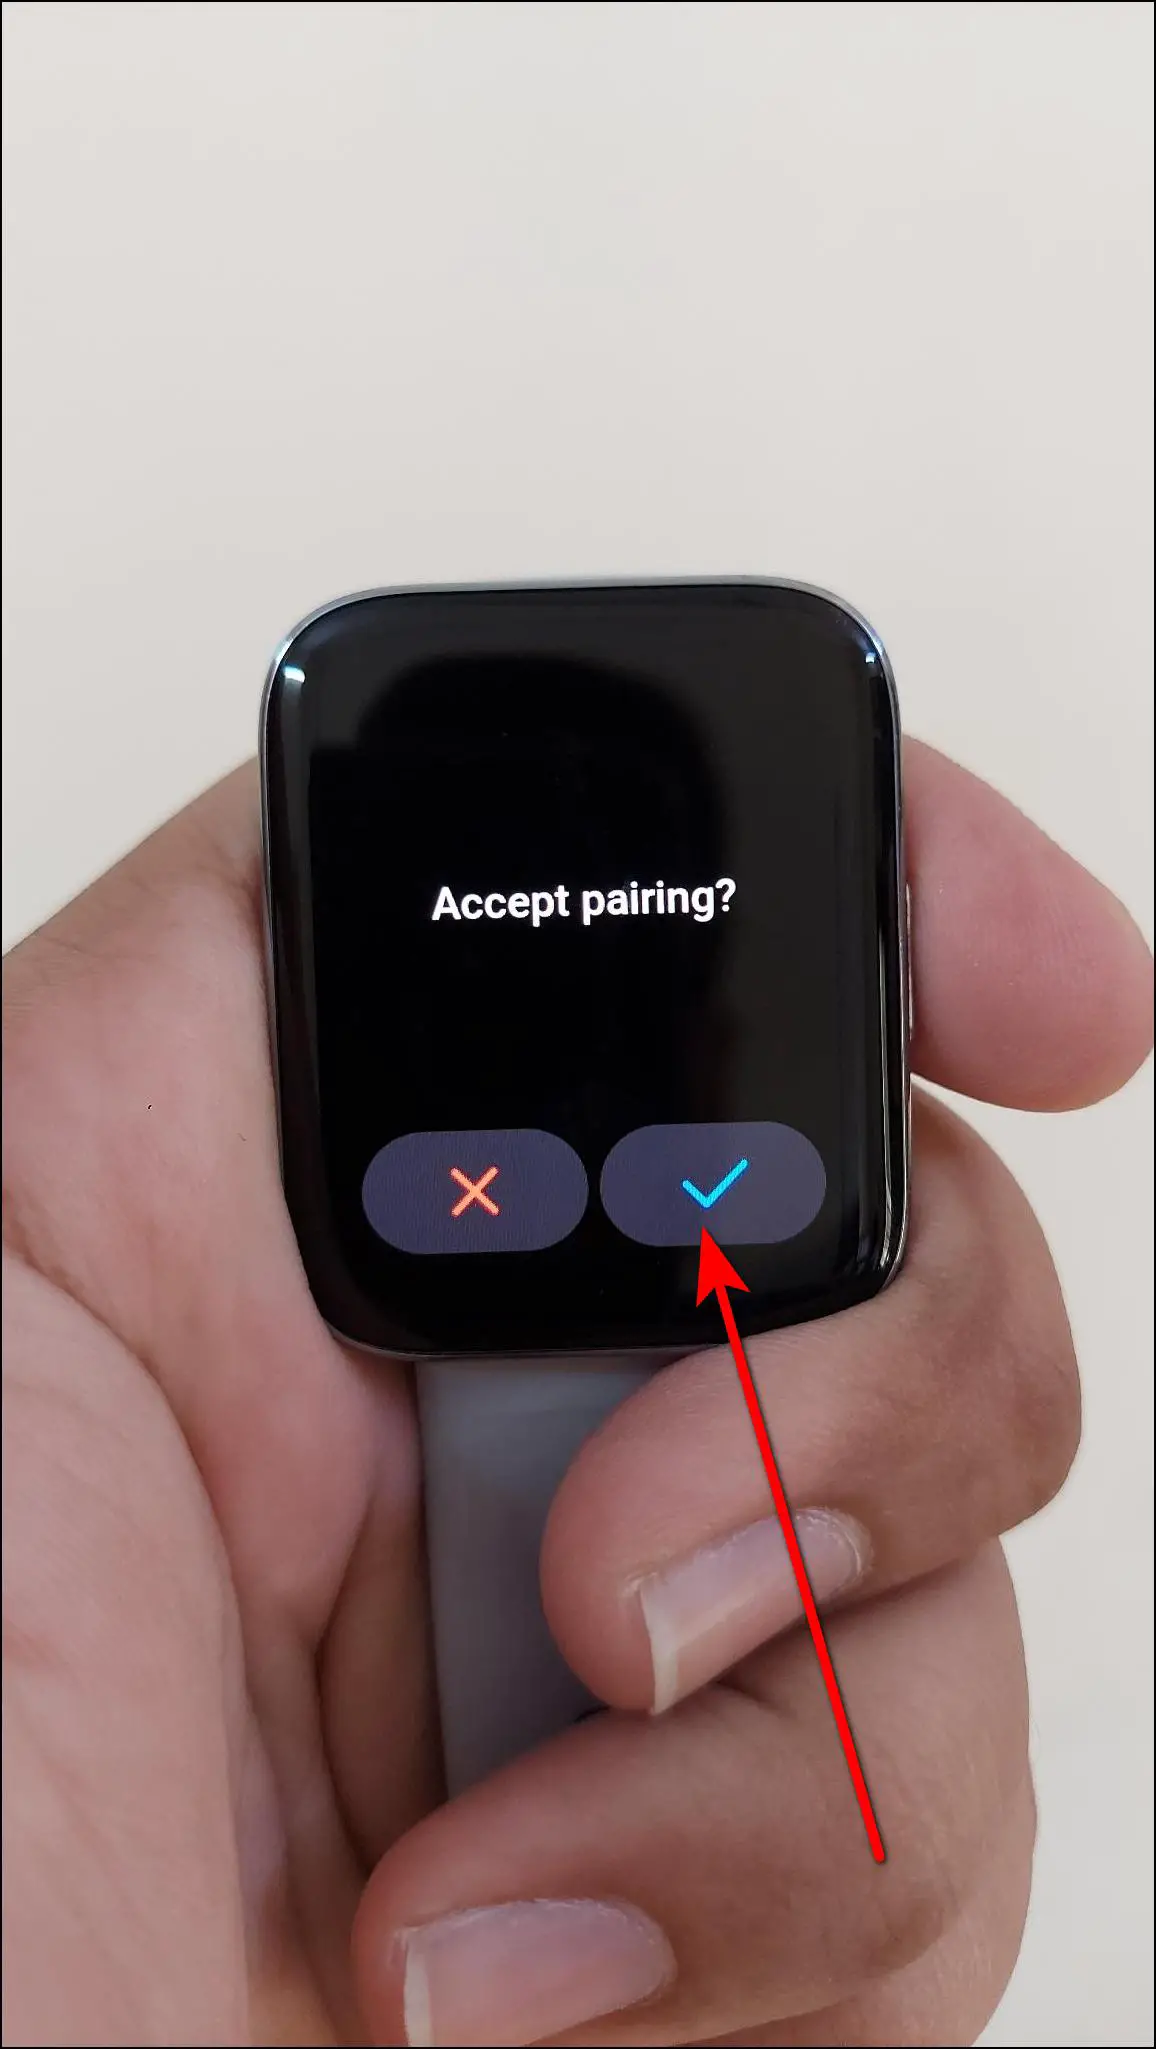 Connect Realme Watch 3 Pro with iPhone